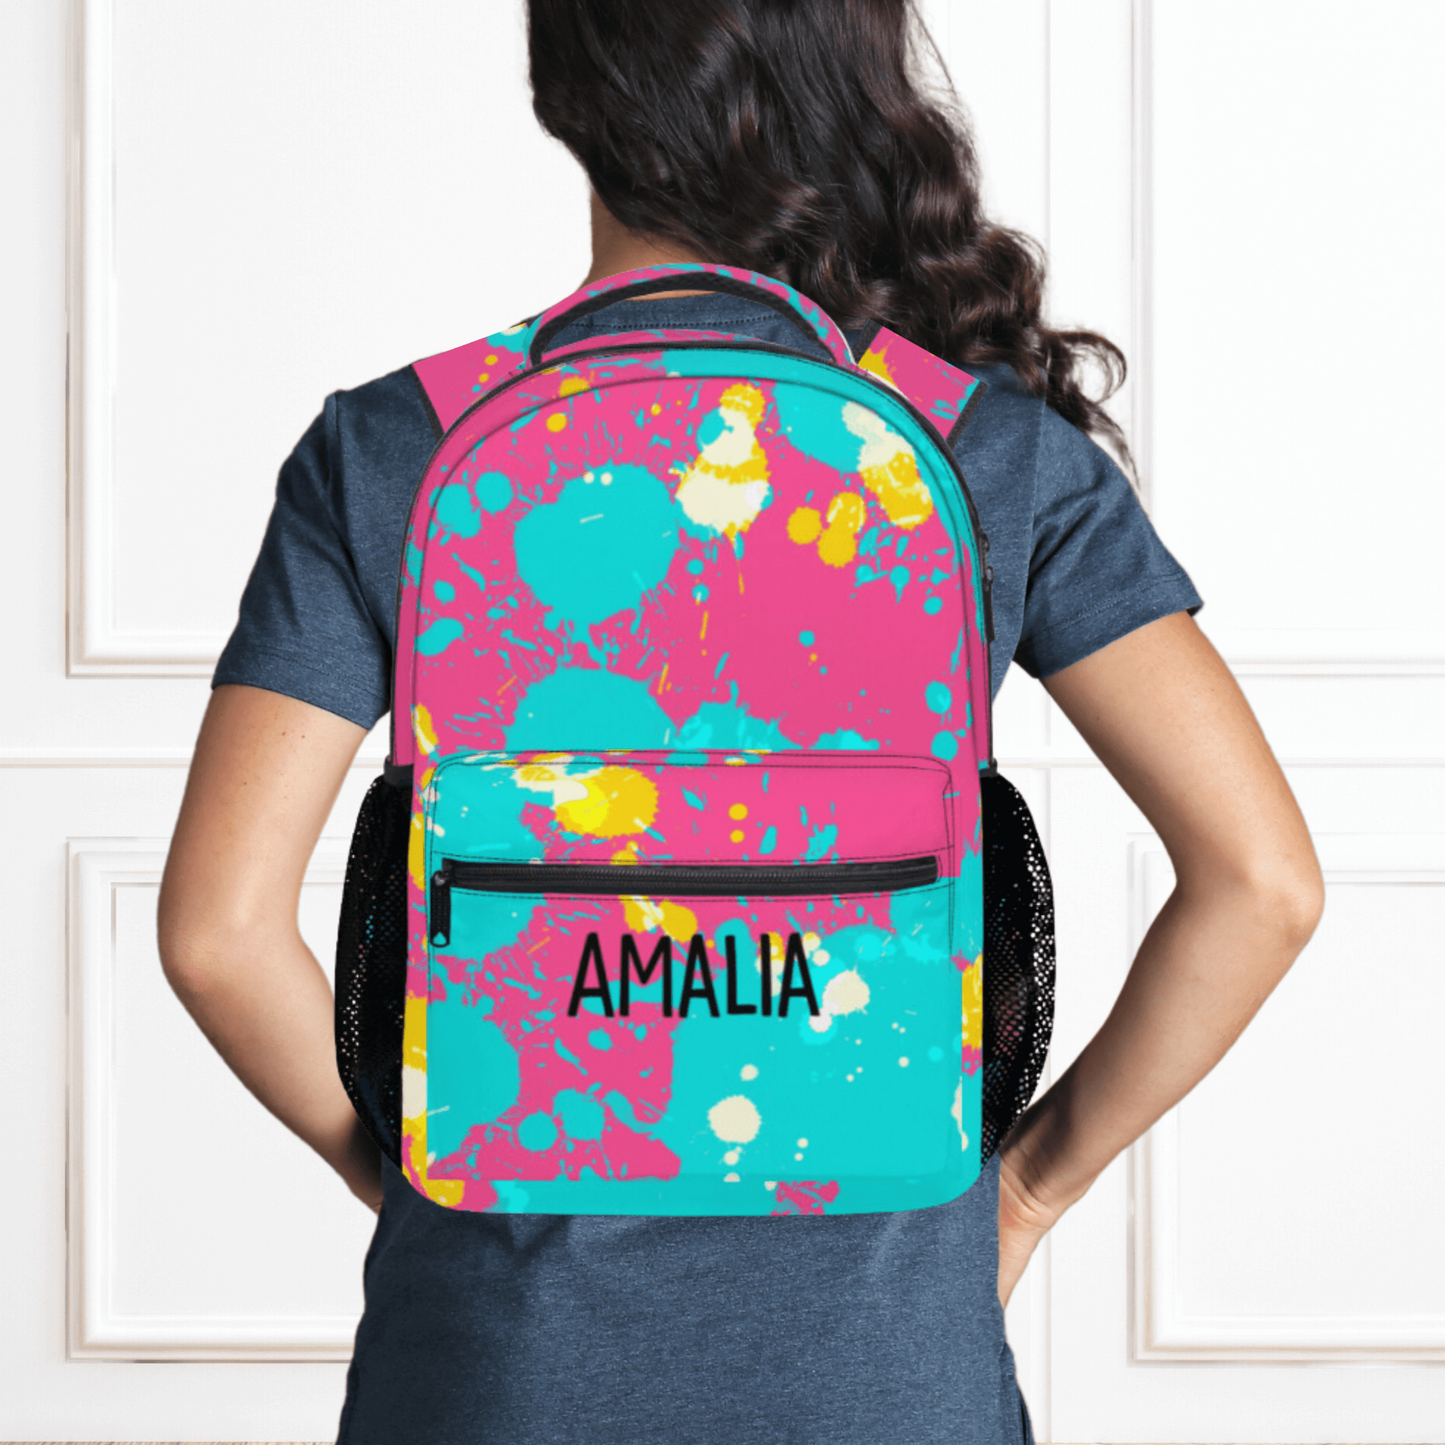 Our pink paint splatter backpack shown wearing the backpack on a model.